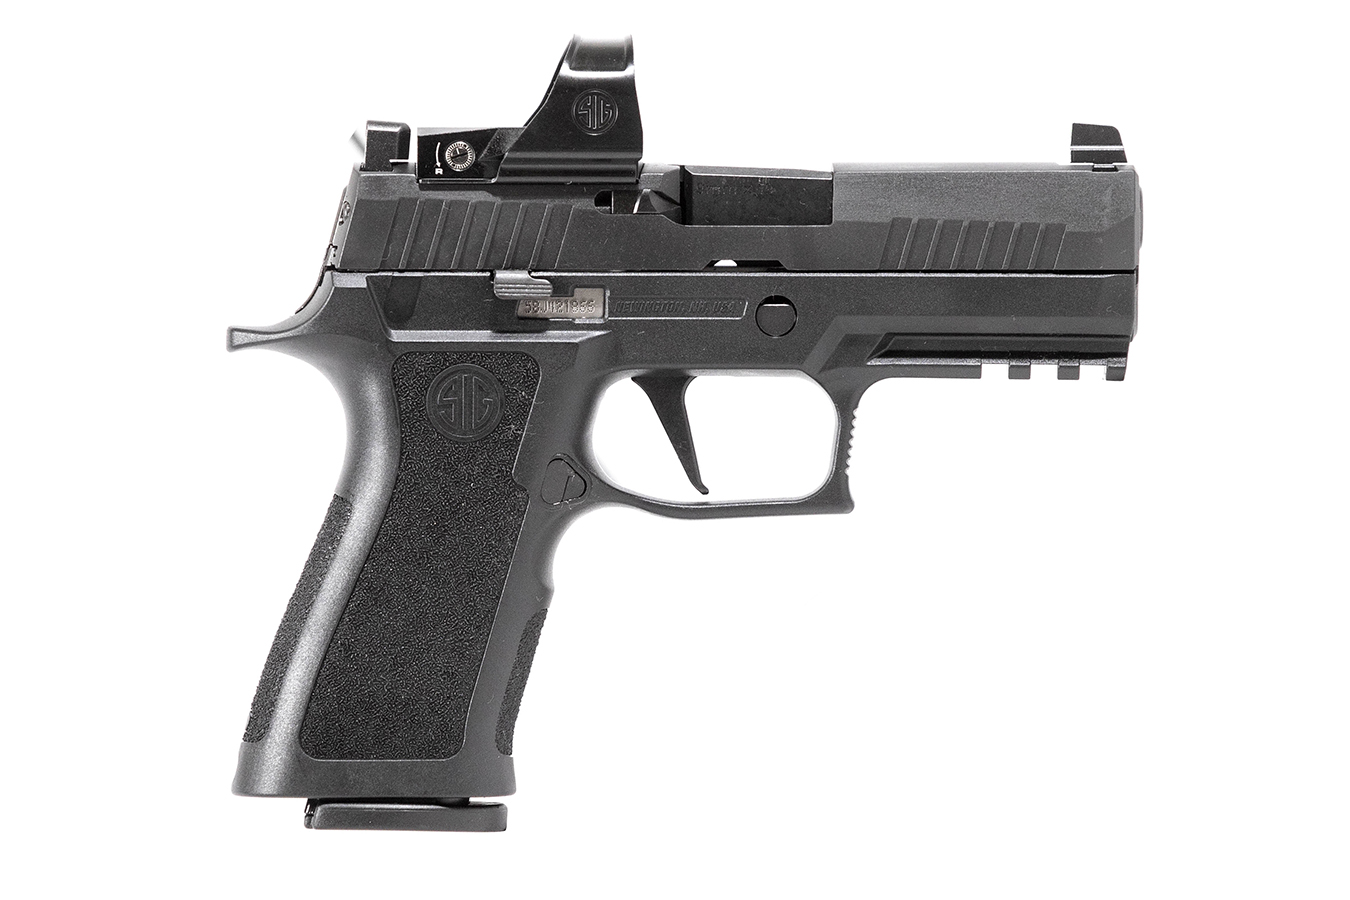 P320 RXP X-COMPACT 9MM PISTOL WITH ROMEO1 PRO OPTIC (LE)